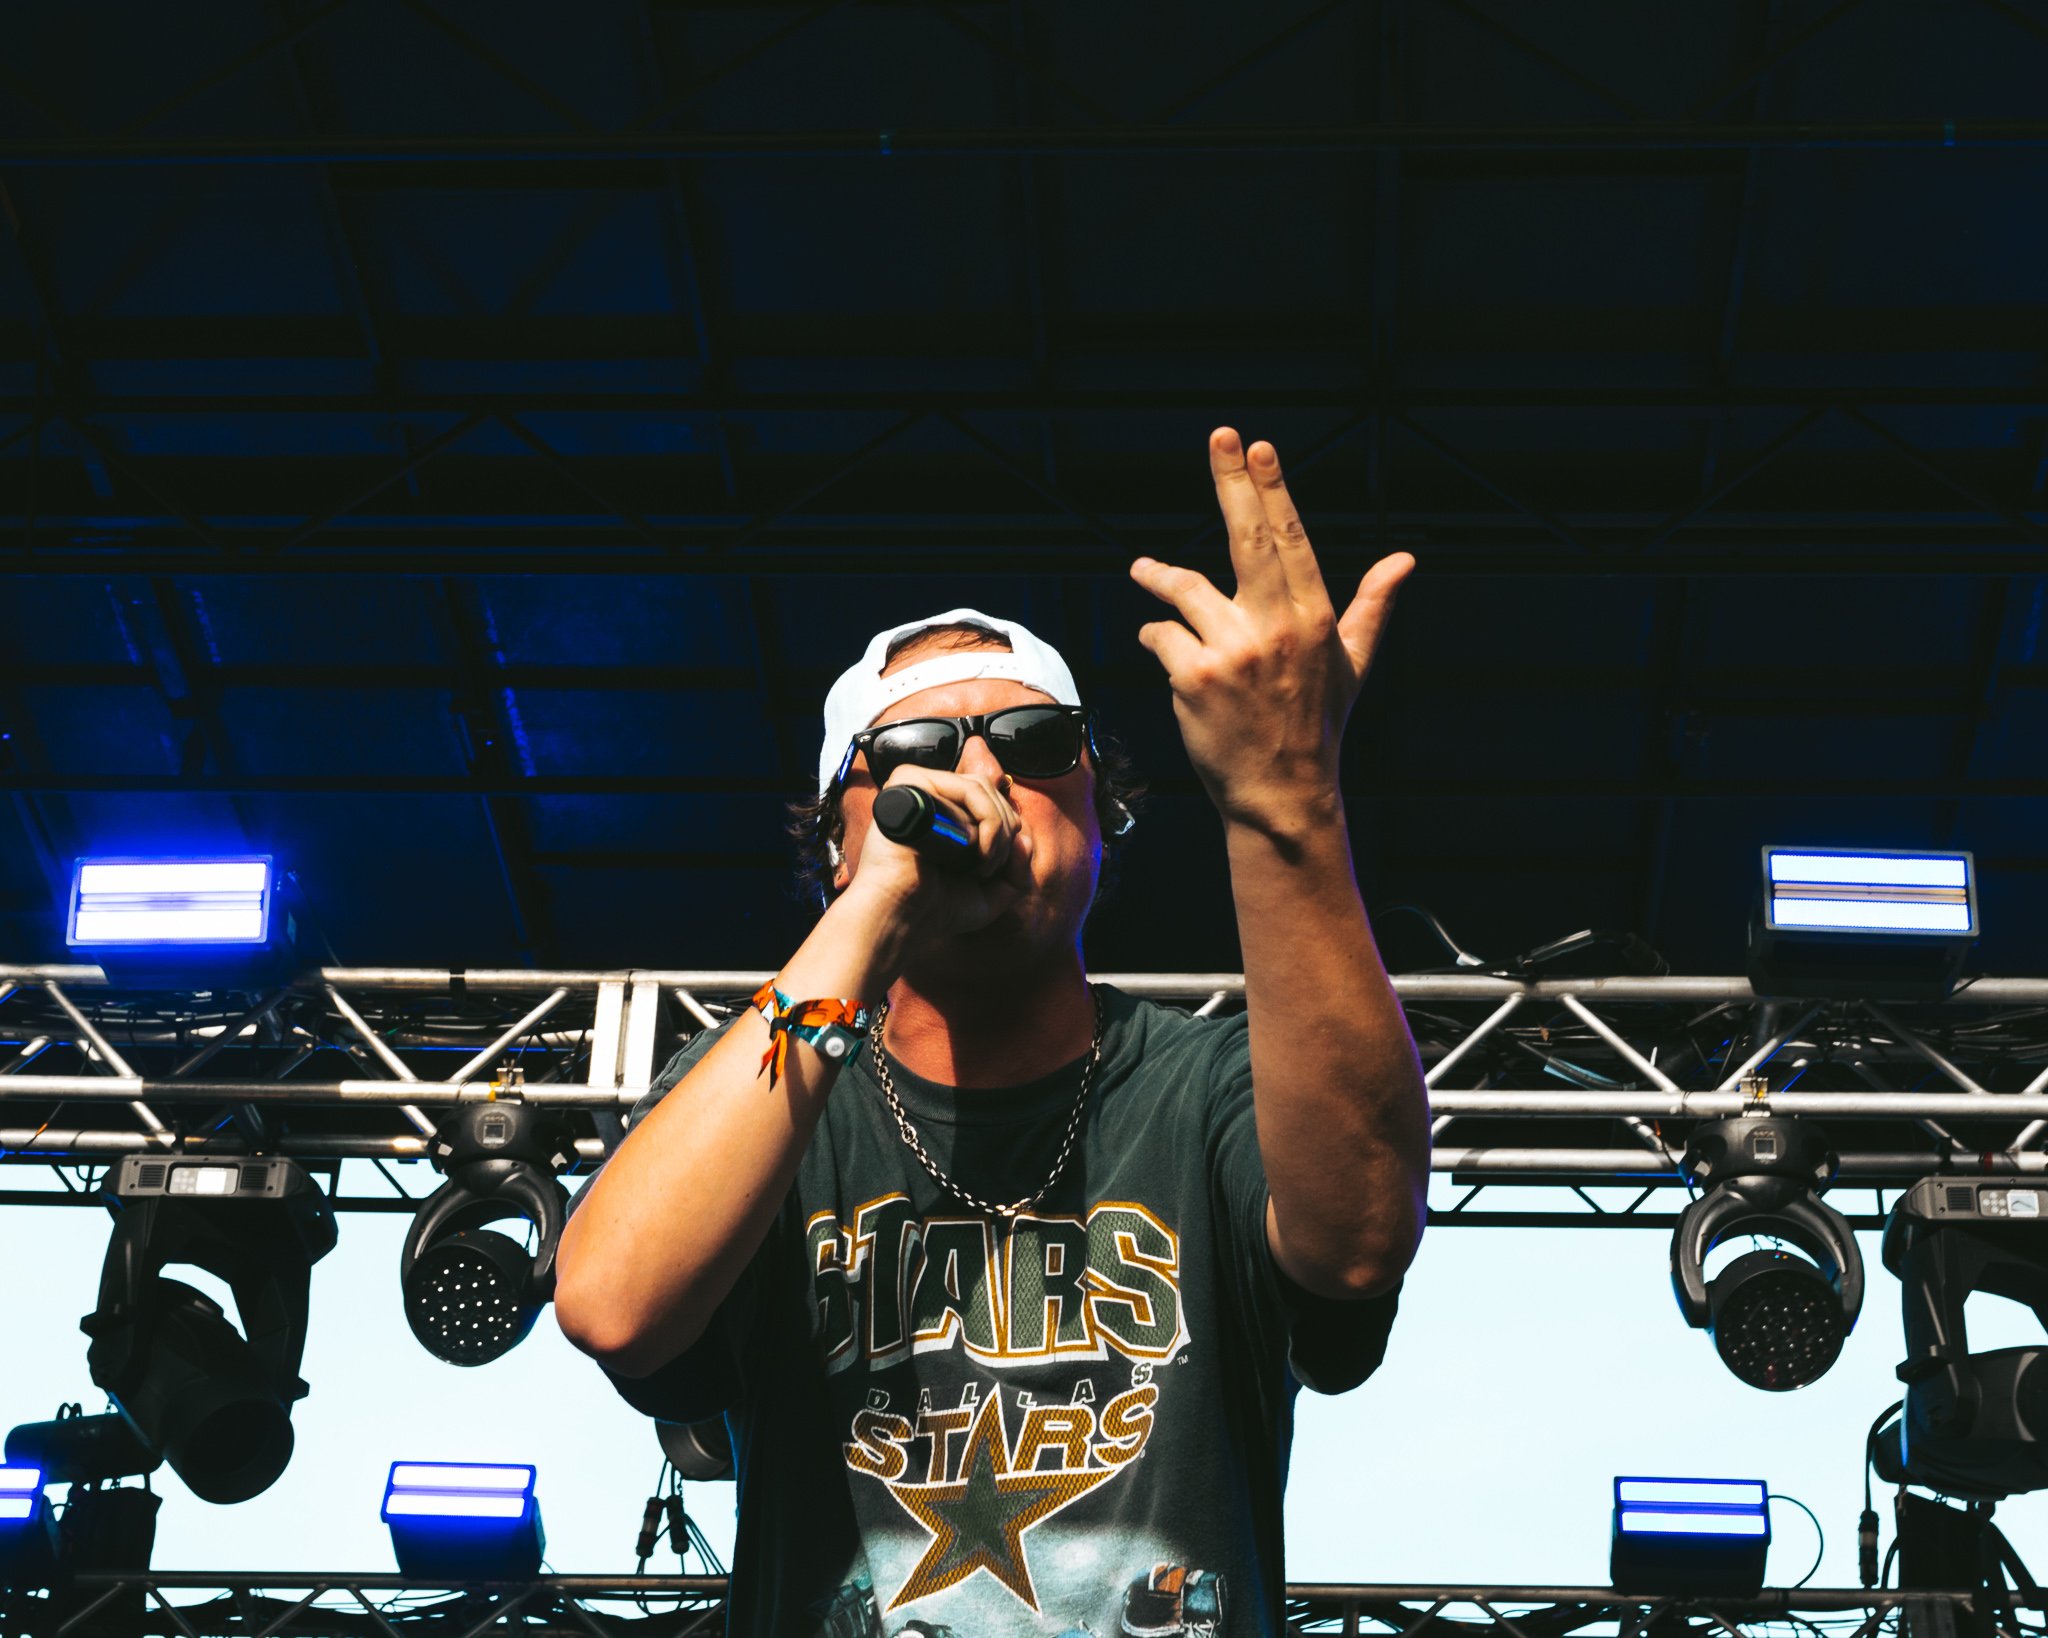  State Champs frontman Derek DiScanio hypes up the crowd. 